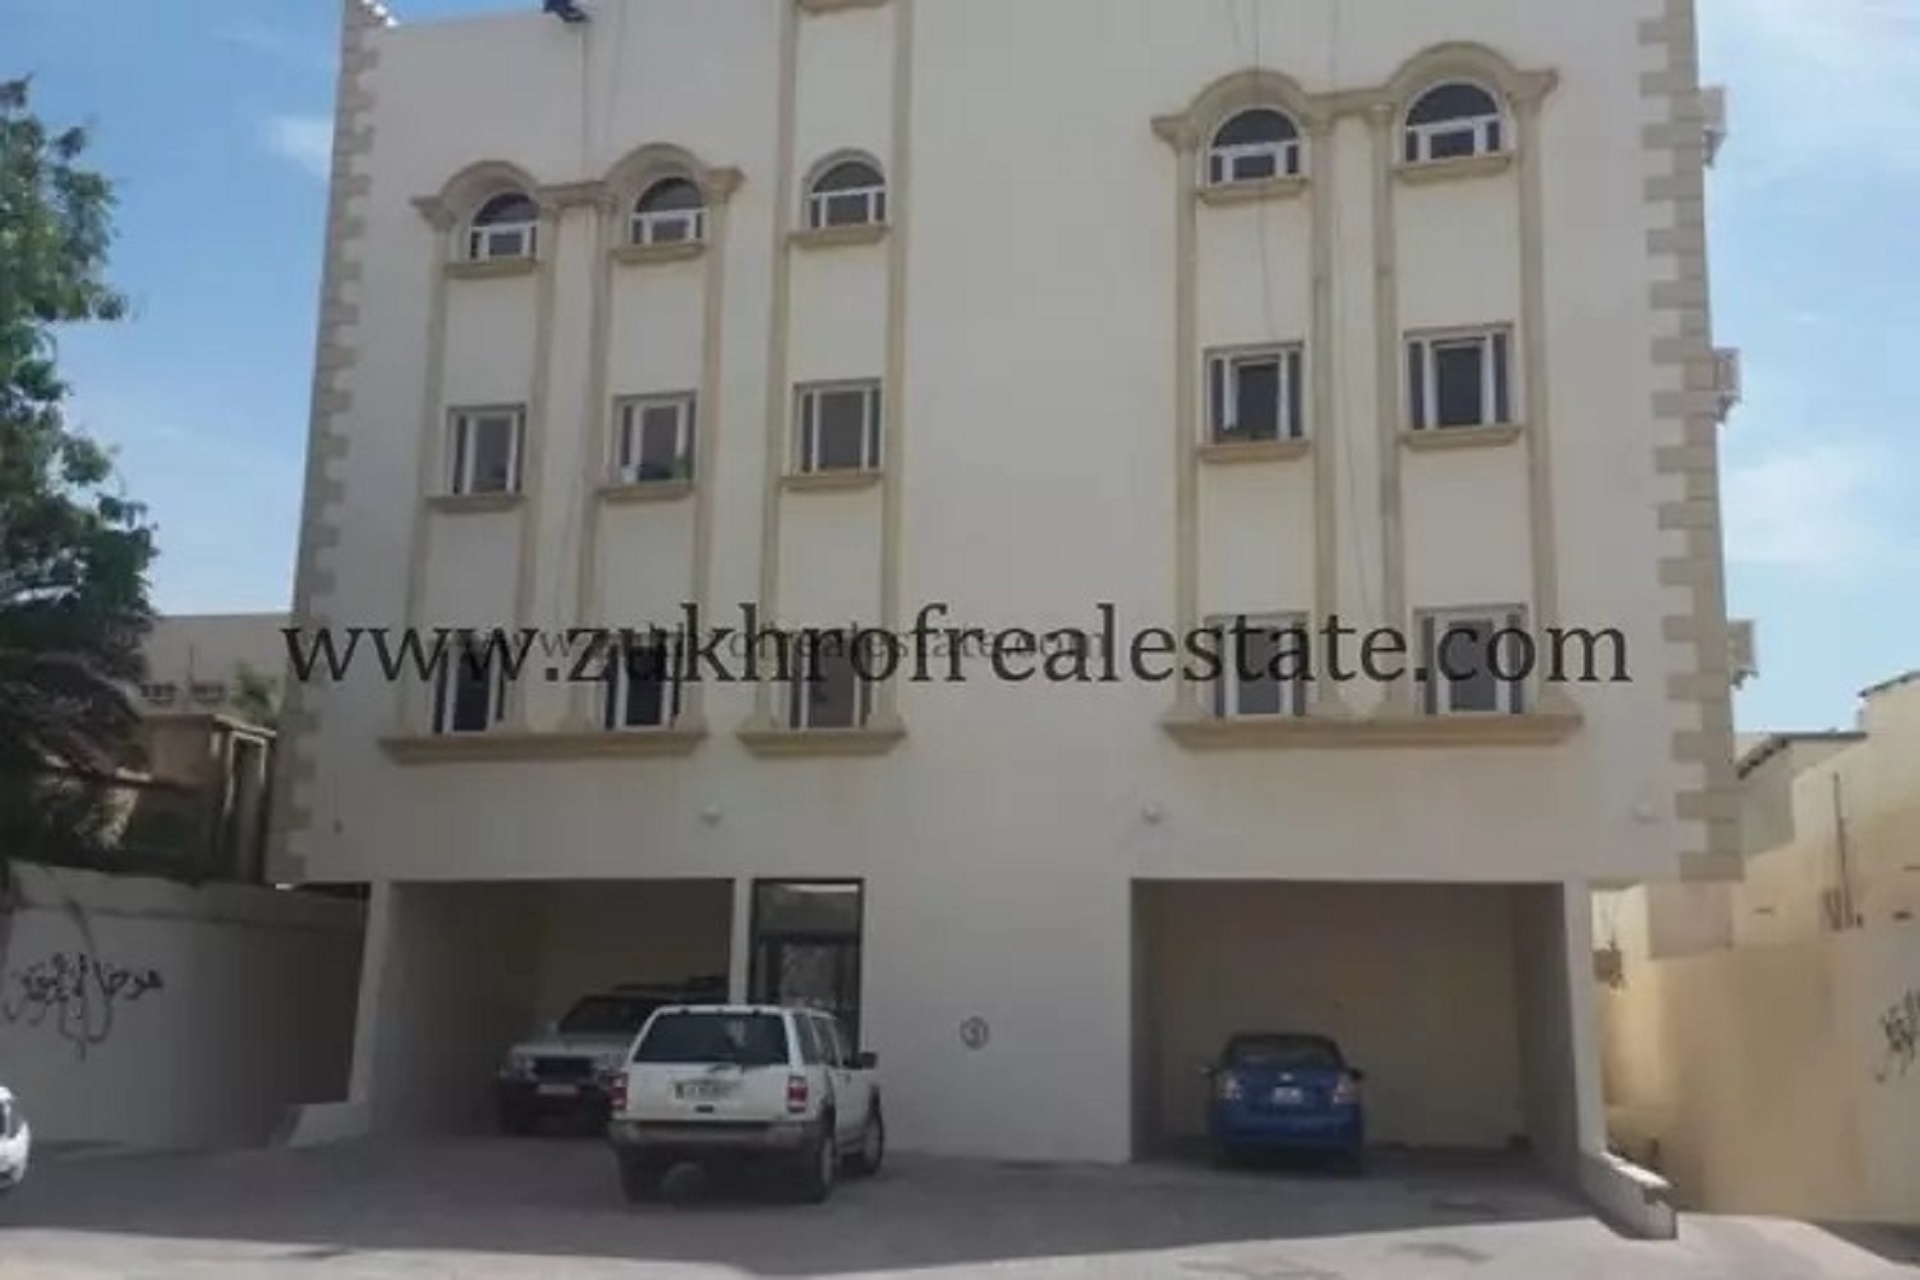 2 bedrooms unfurnished apartments in KTA